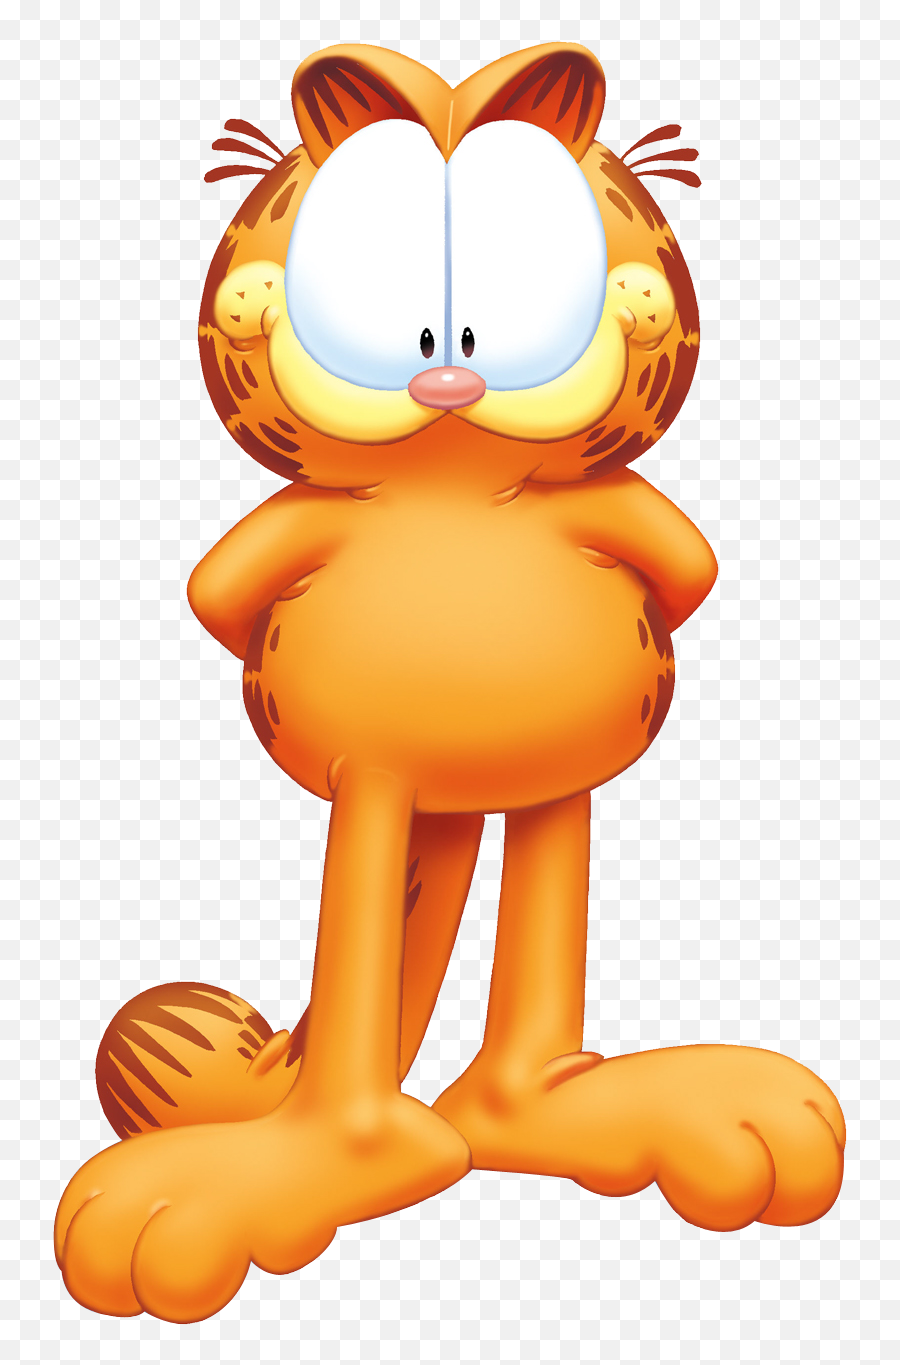 Download Garfield 3d Png Image With No - Garfield Hd,Garfield Transparent